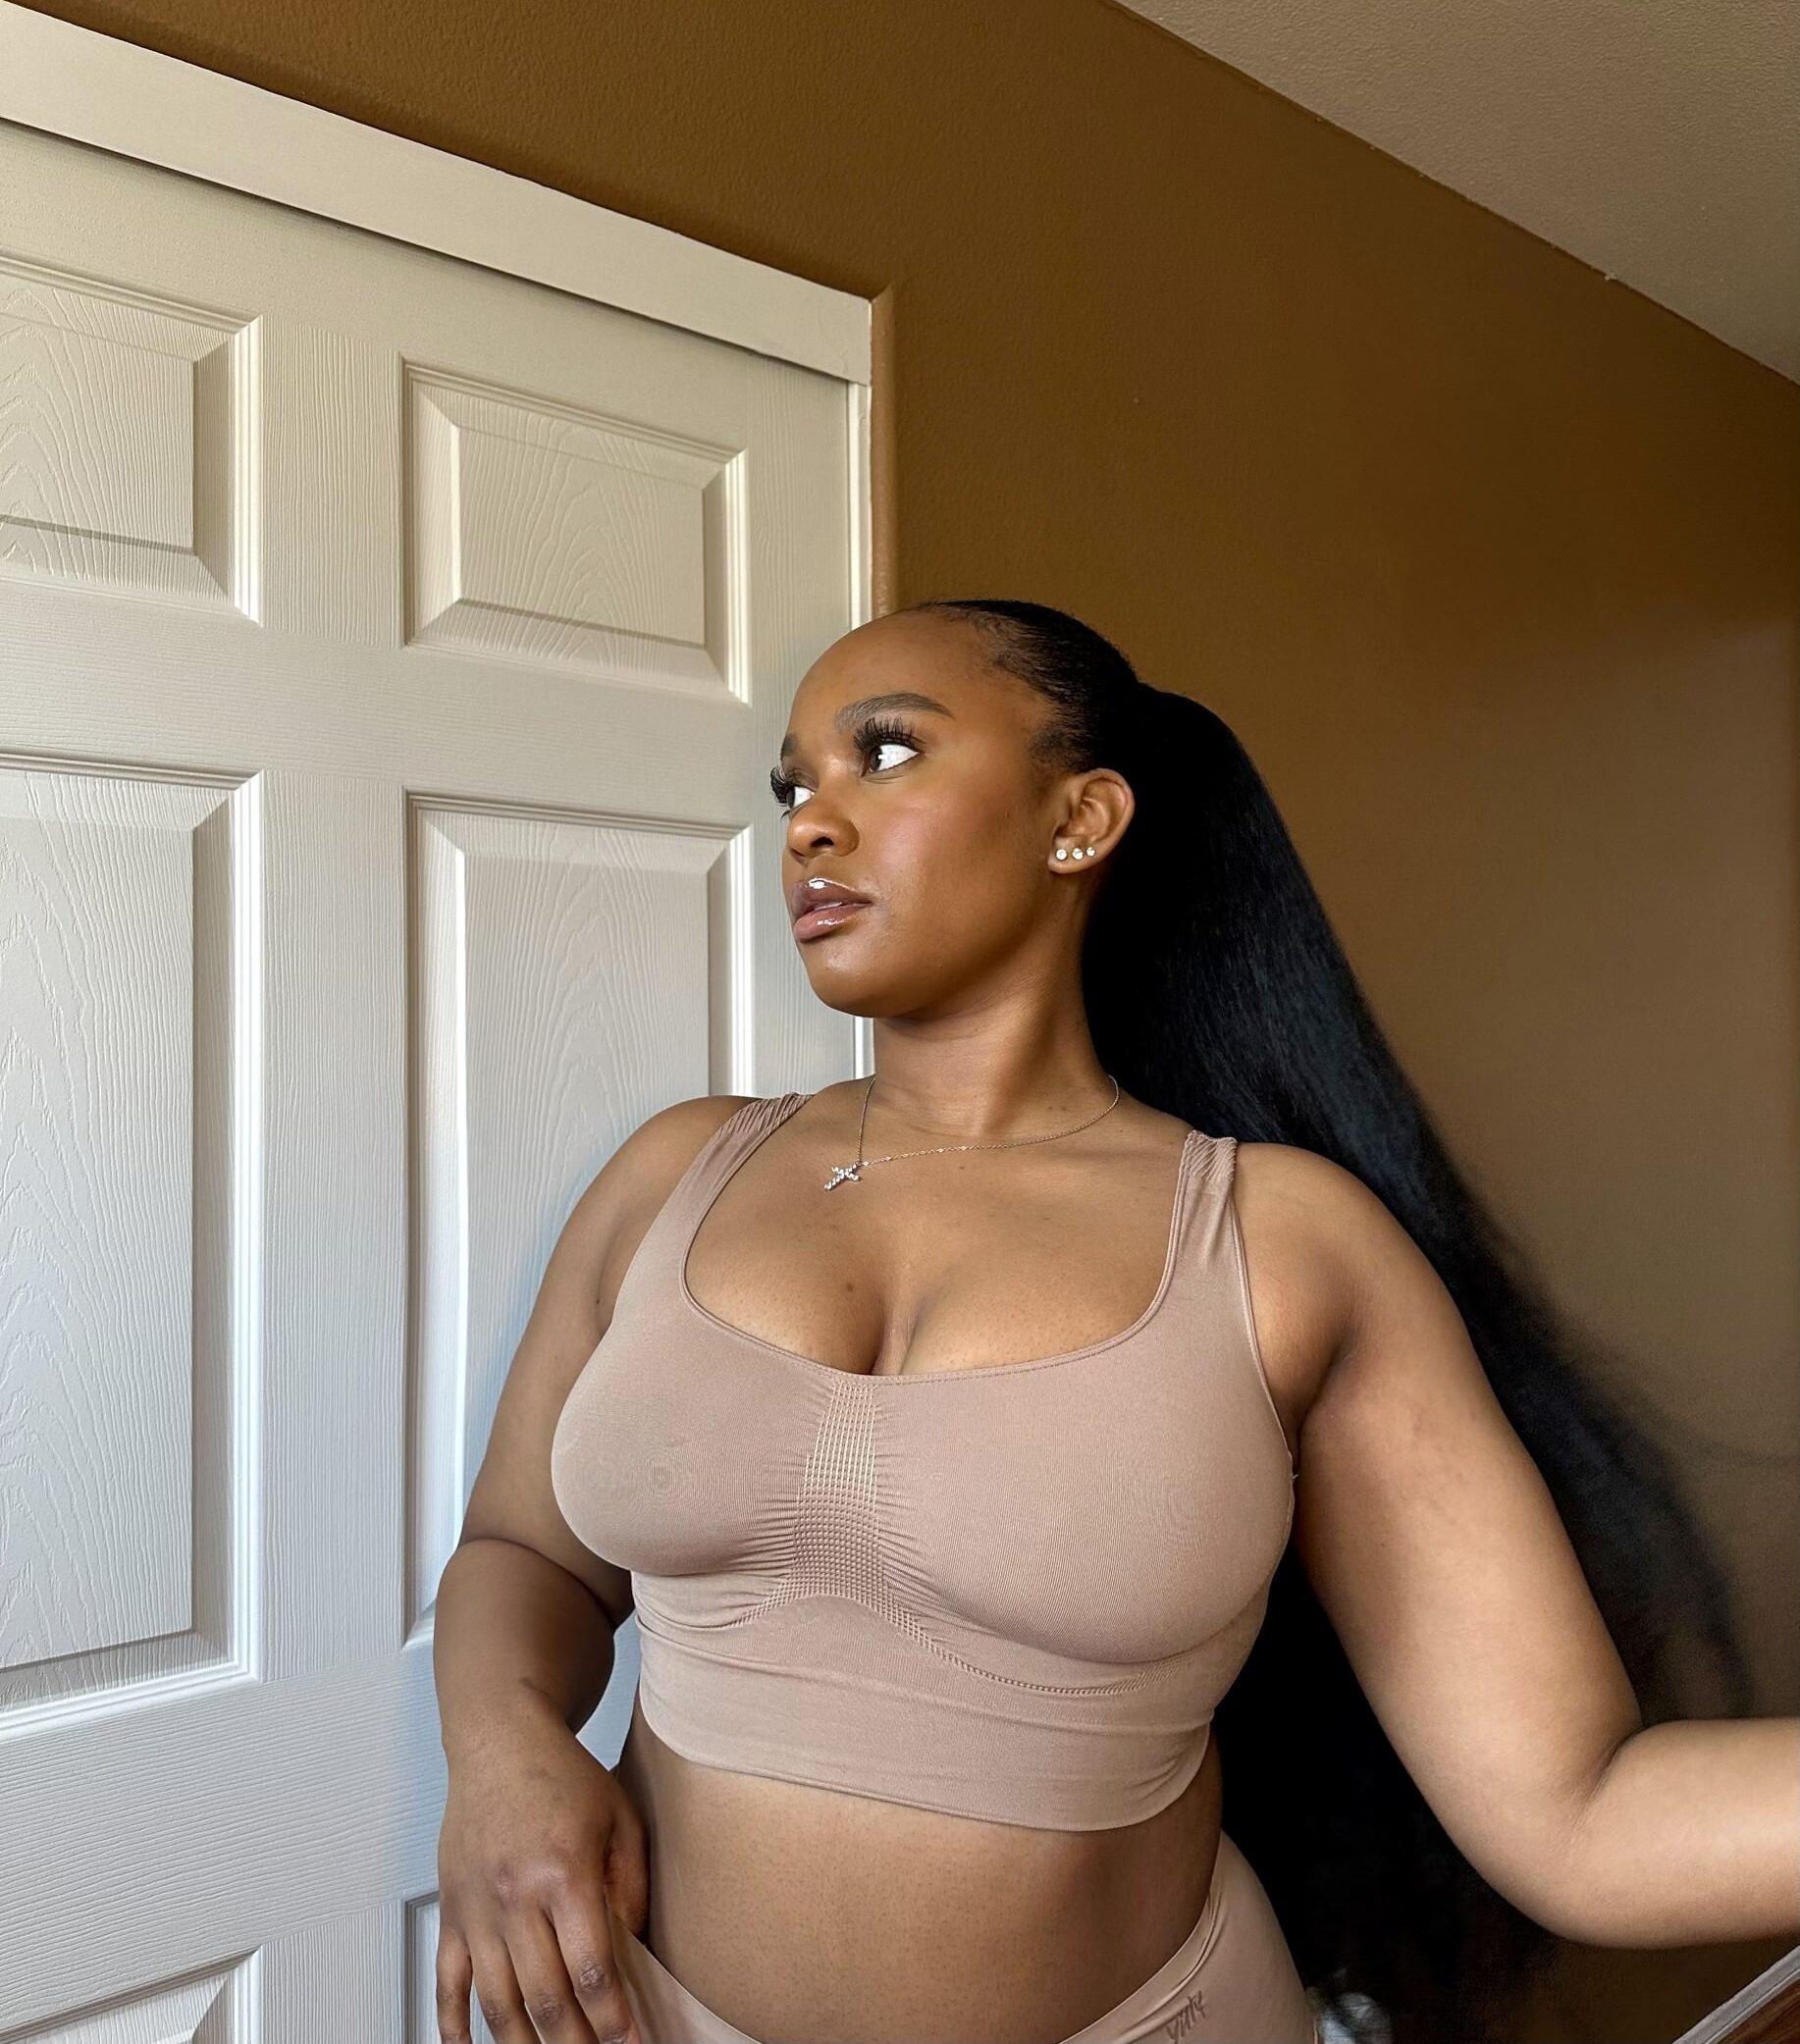 These Nearly Naked Bras Have Gone Viral on TikTok—Are They Worth the Hype?